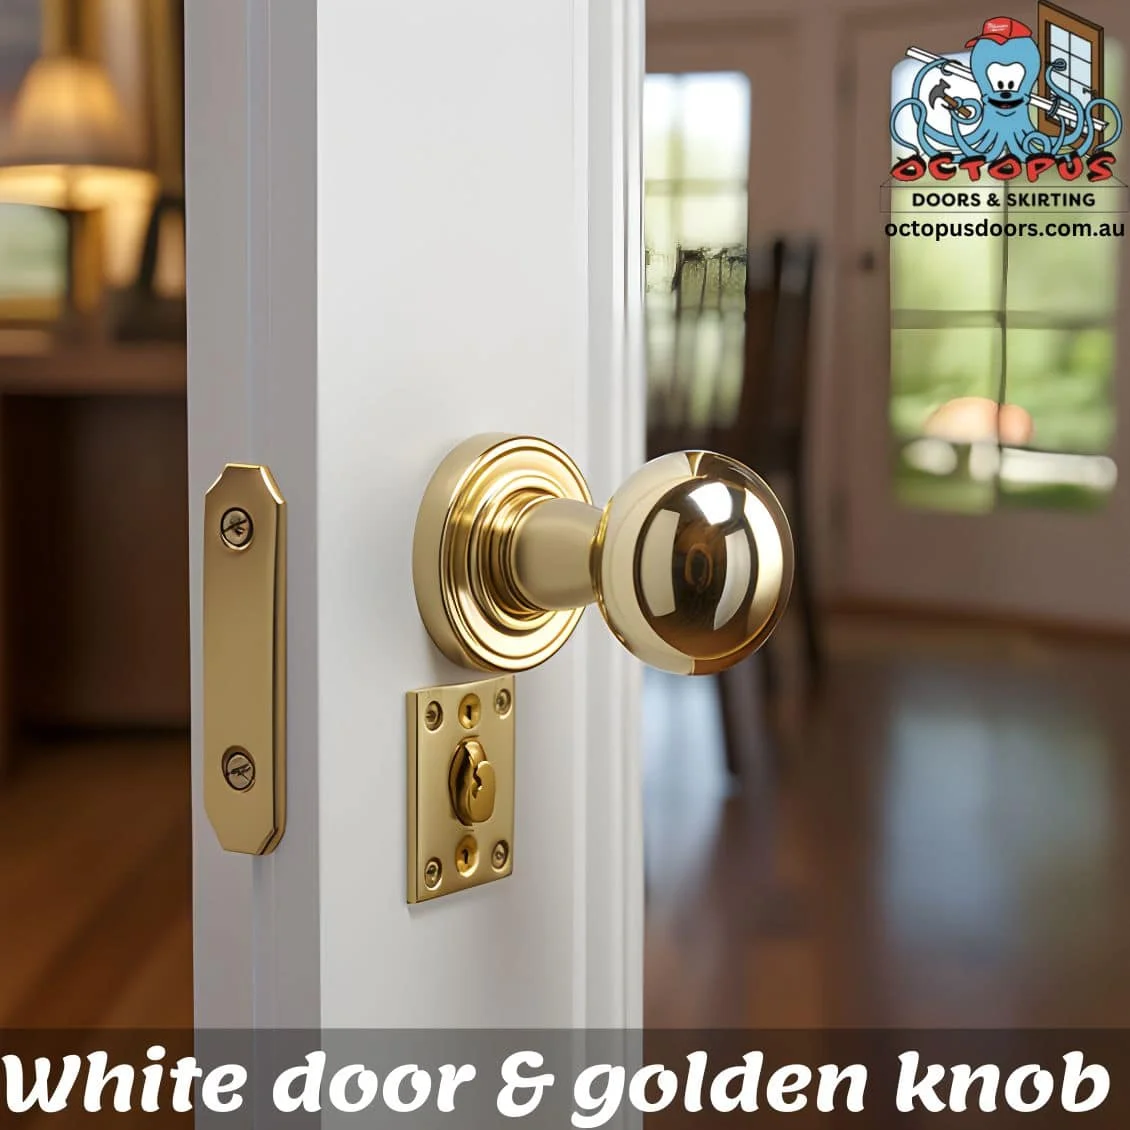 Step by Step Door Knob Install for Beginners 